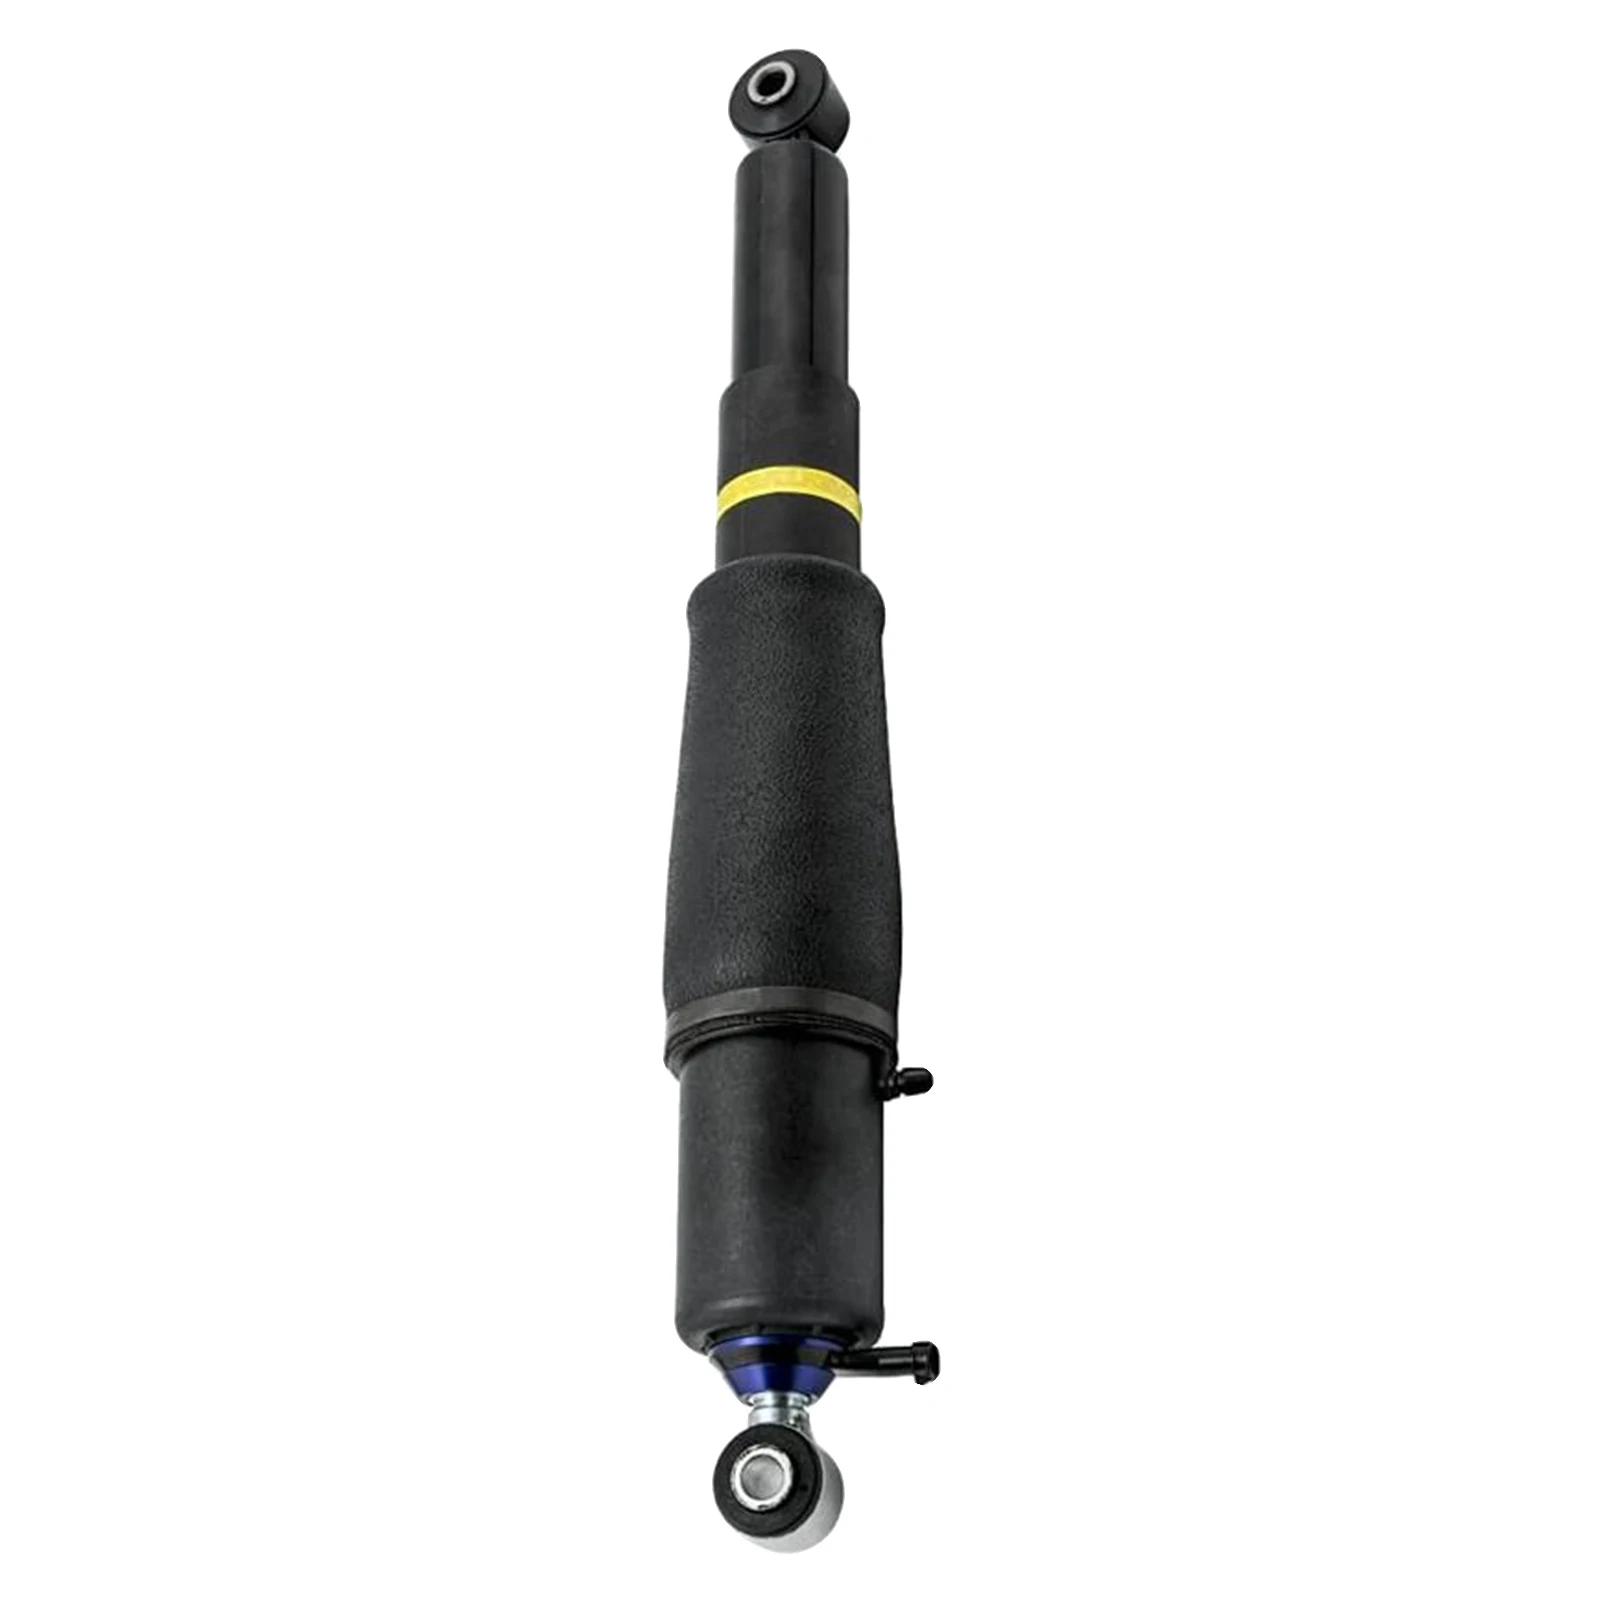 Rear Air Lift Shock Struts Air Ride Shock Absorber for Chevy Avalanche / 1500 02-13 22187156 25979391 AS-2127 19300072